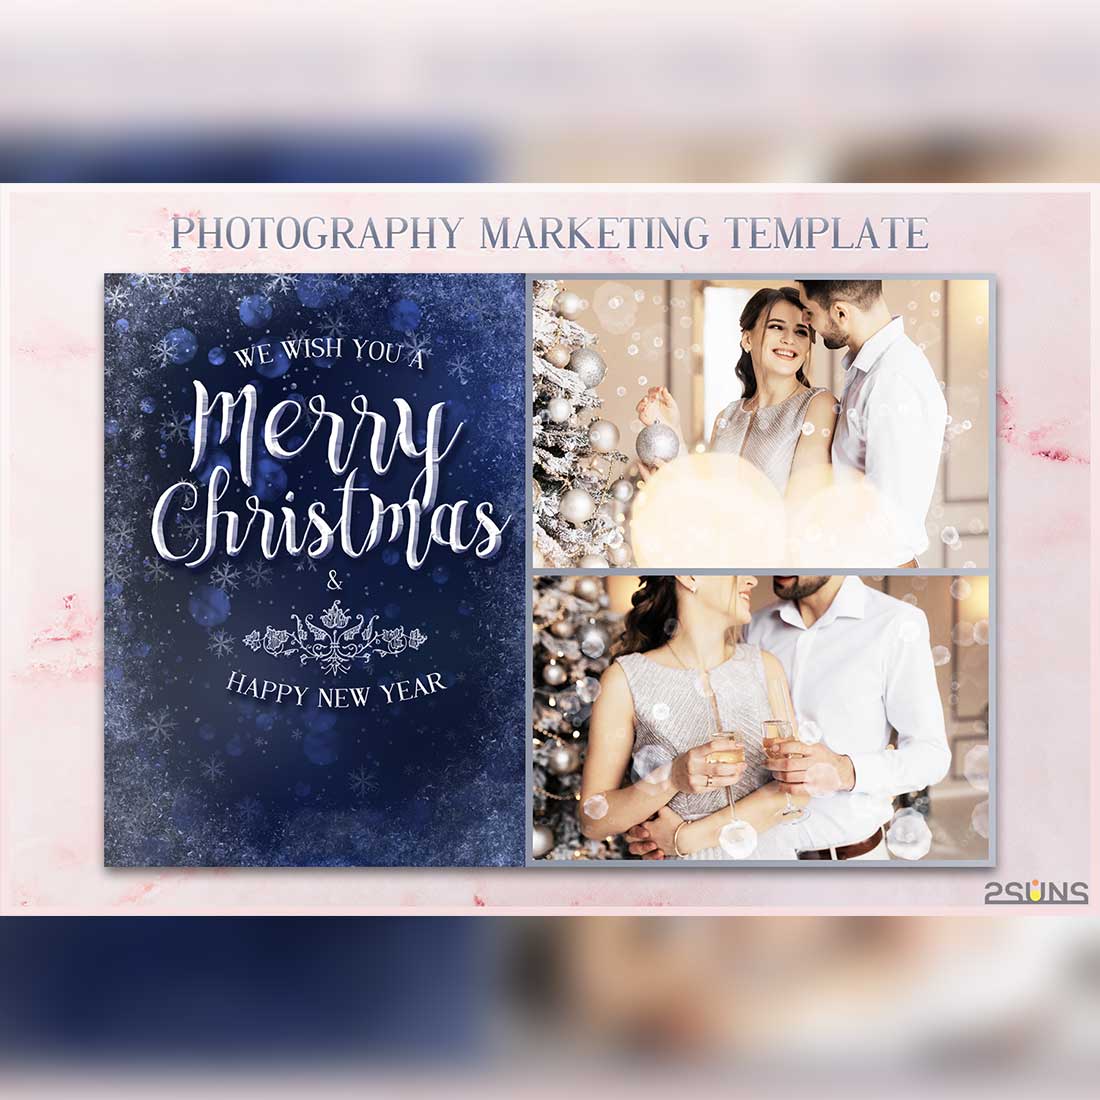 Christmas Marketing Board Photoshop Templates Cover Image.